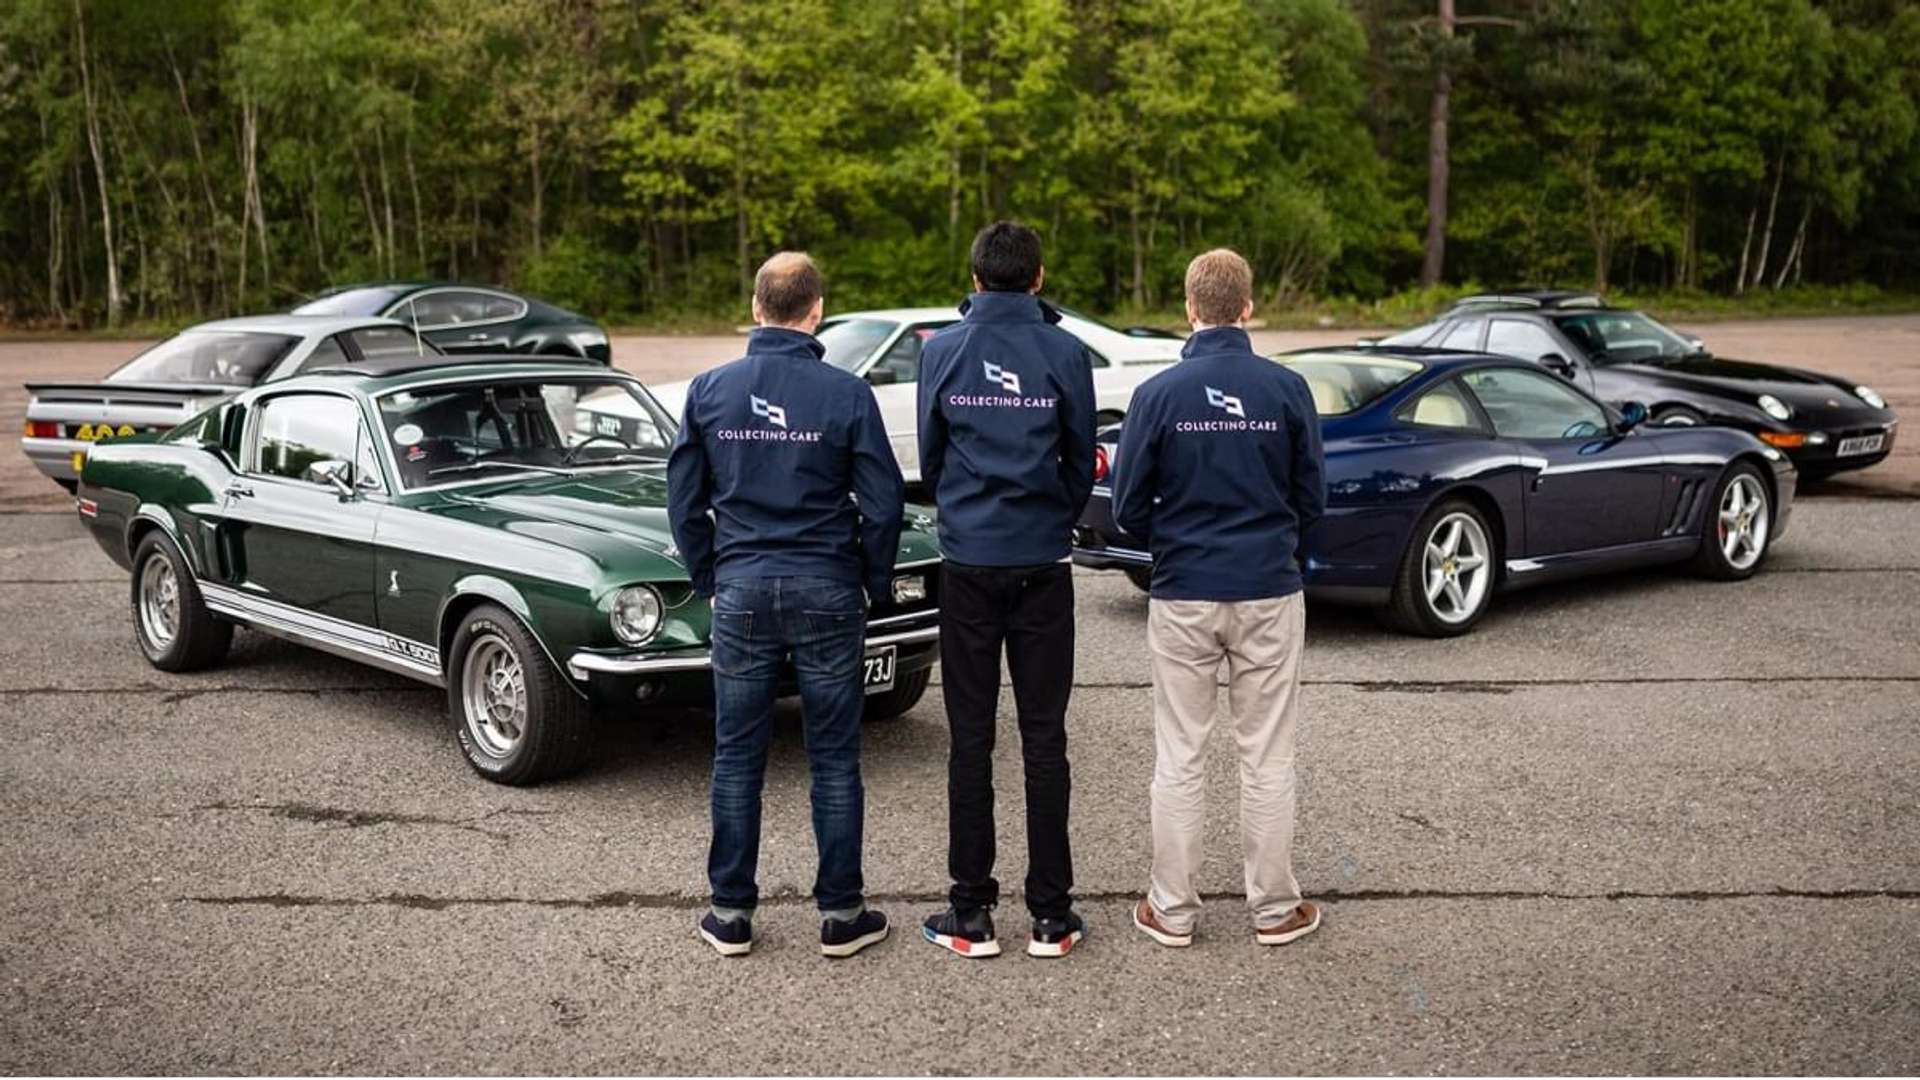 An image of three people, wearing “Collecting Cars” jackets, standing in front of a group of classic cars.